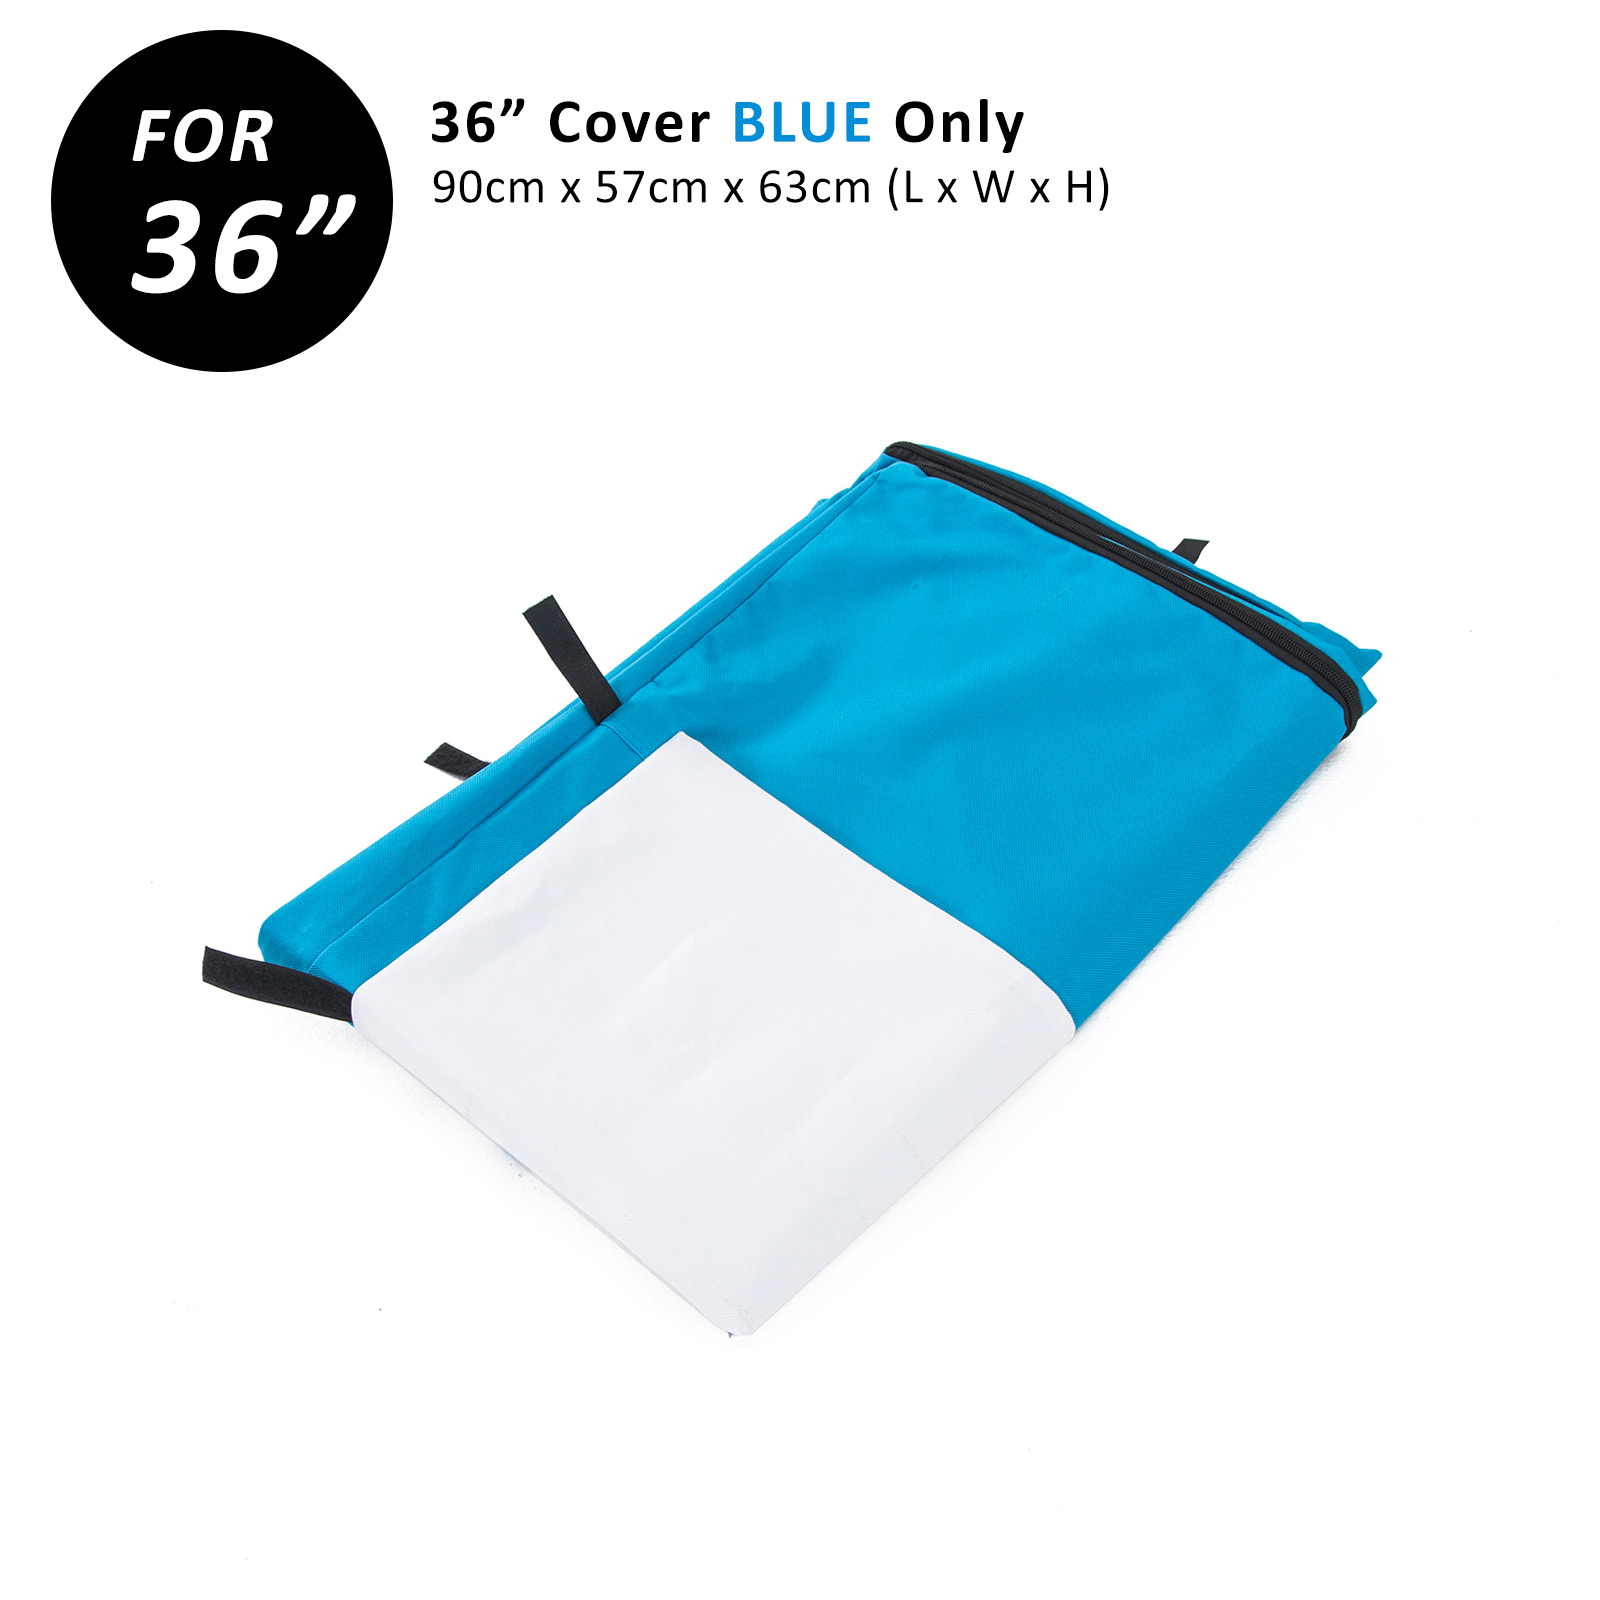 36in Cover for Wire Dog Cage - BLUE